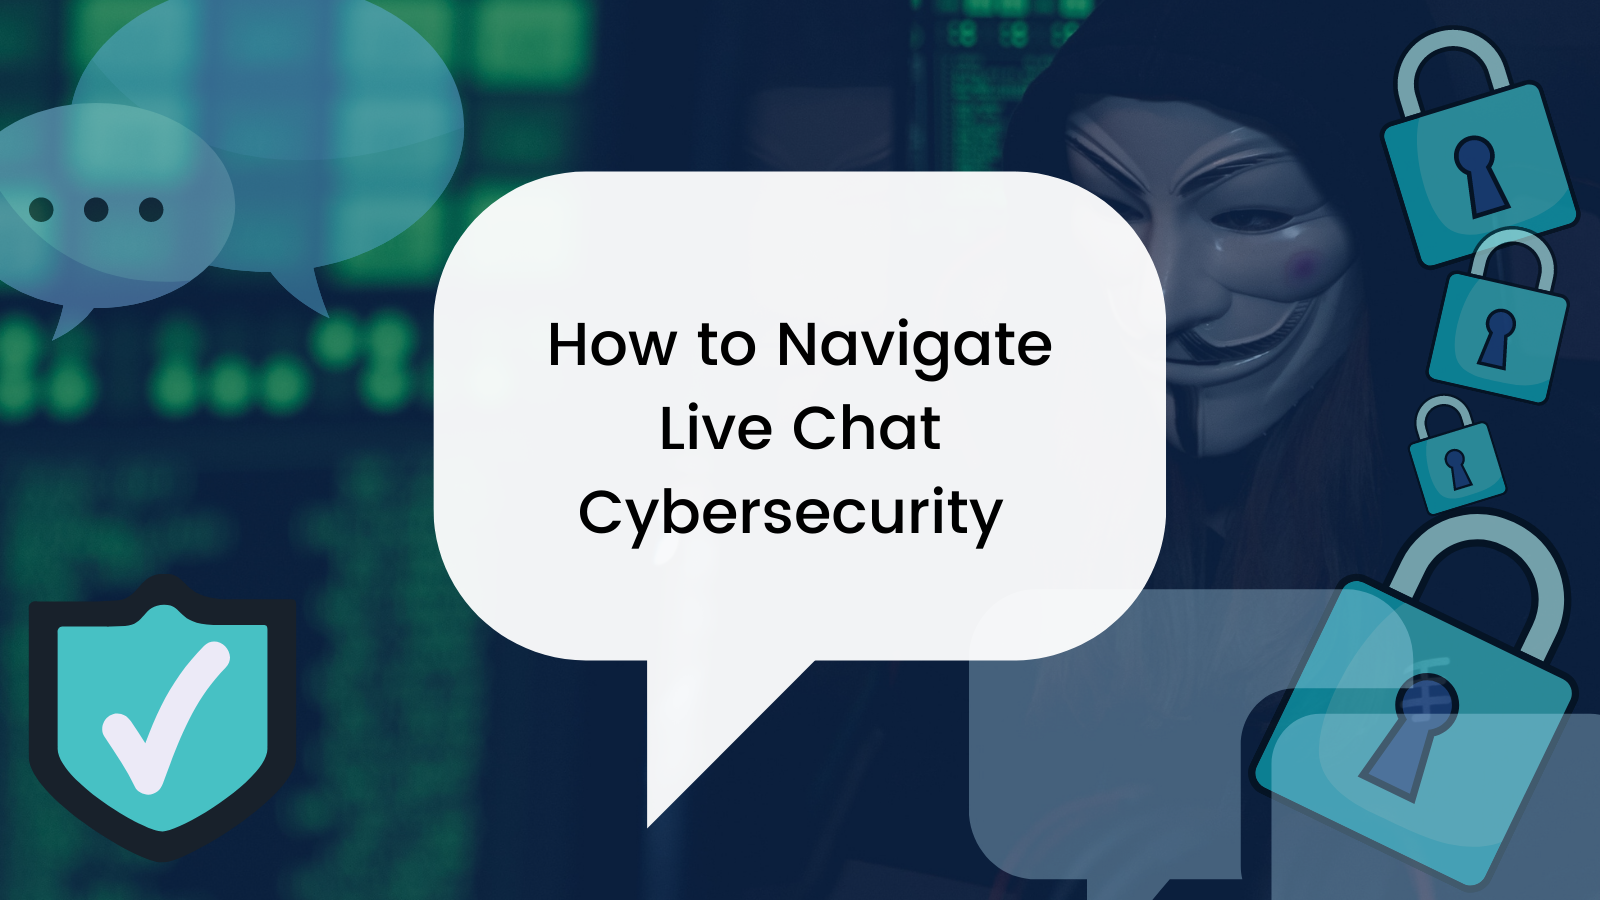 How to Navigate Live Chat Cybersecurity